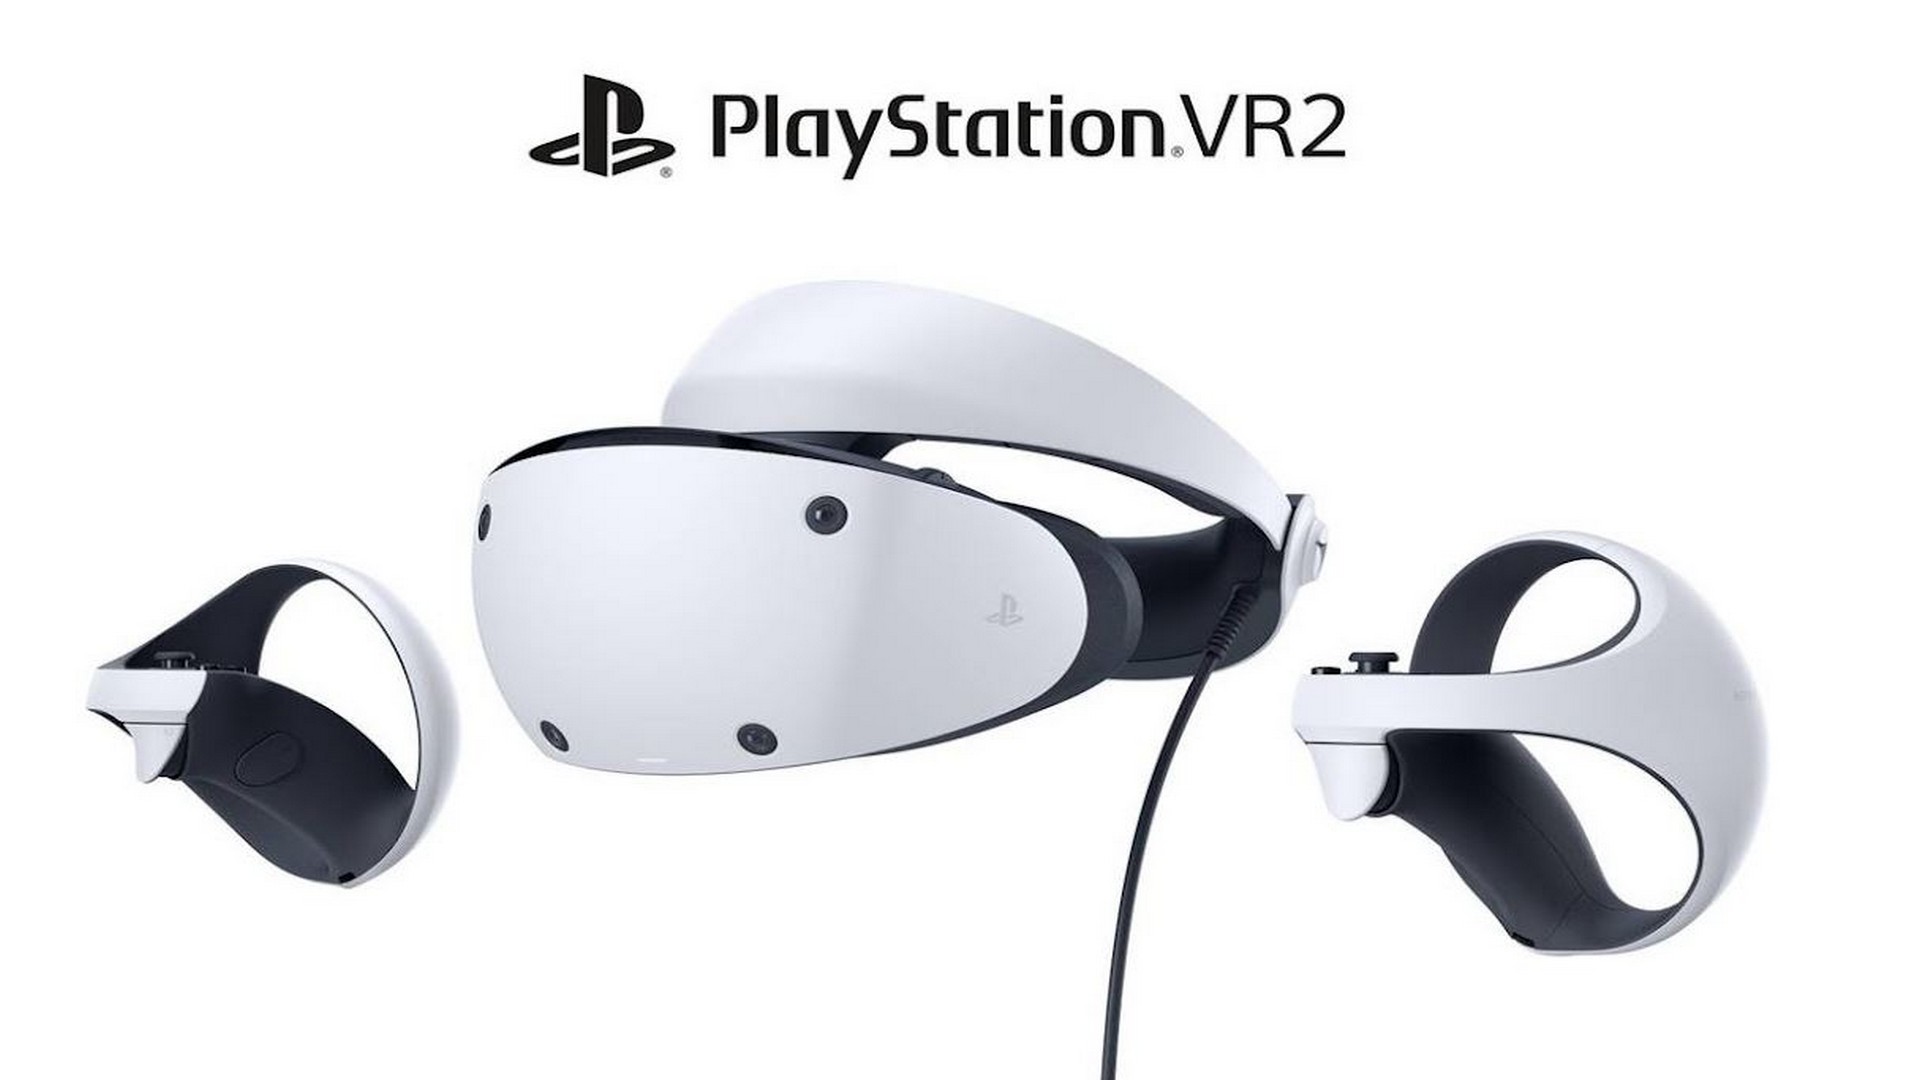 Early Look At The User Experience For PlayStation VR2